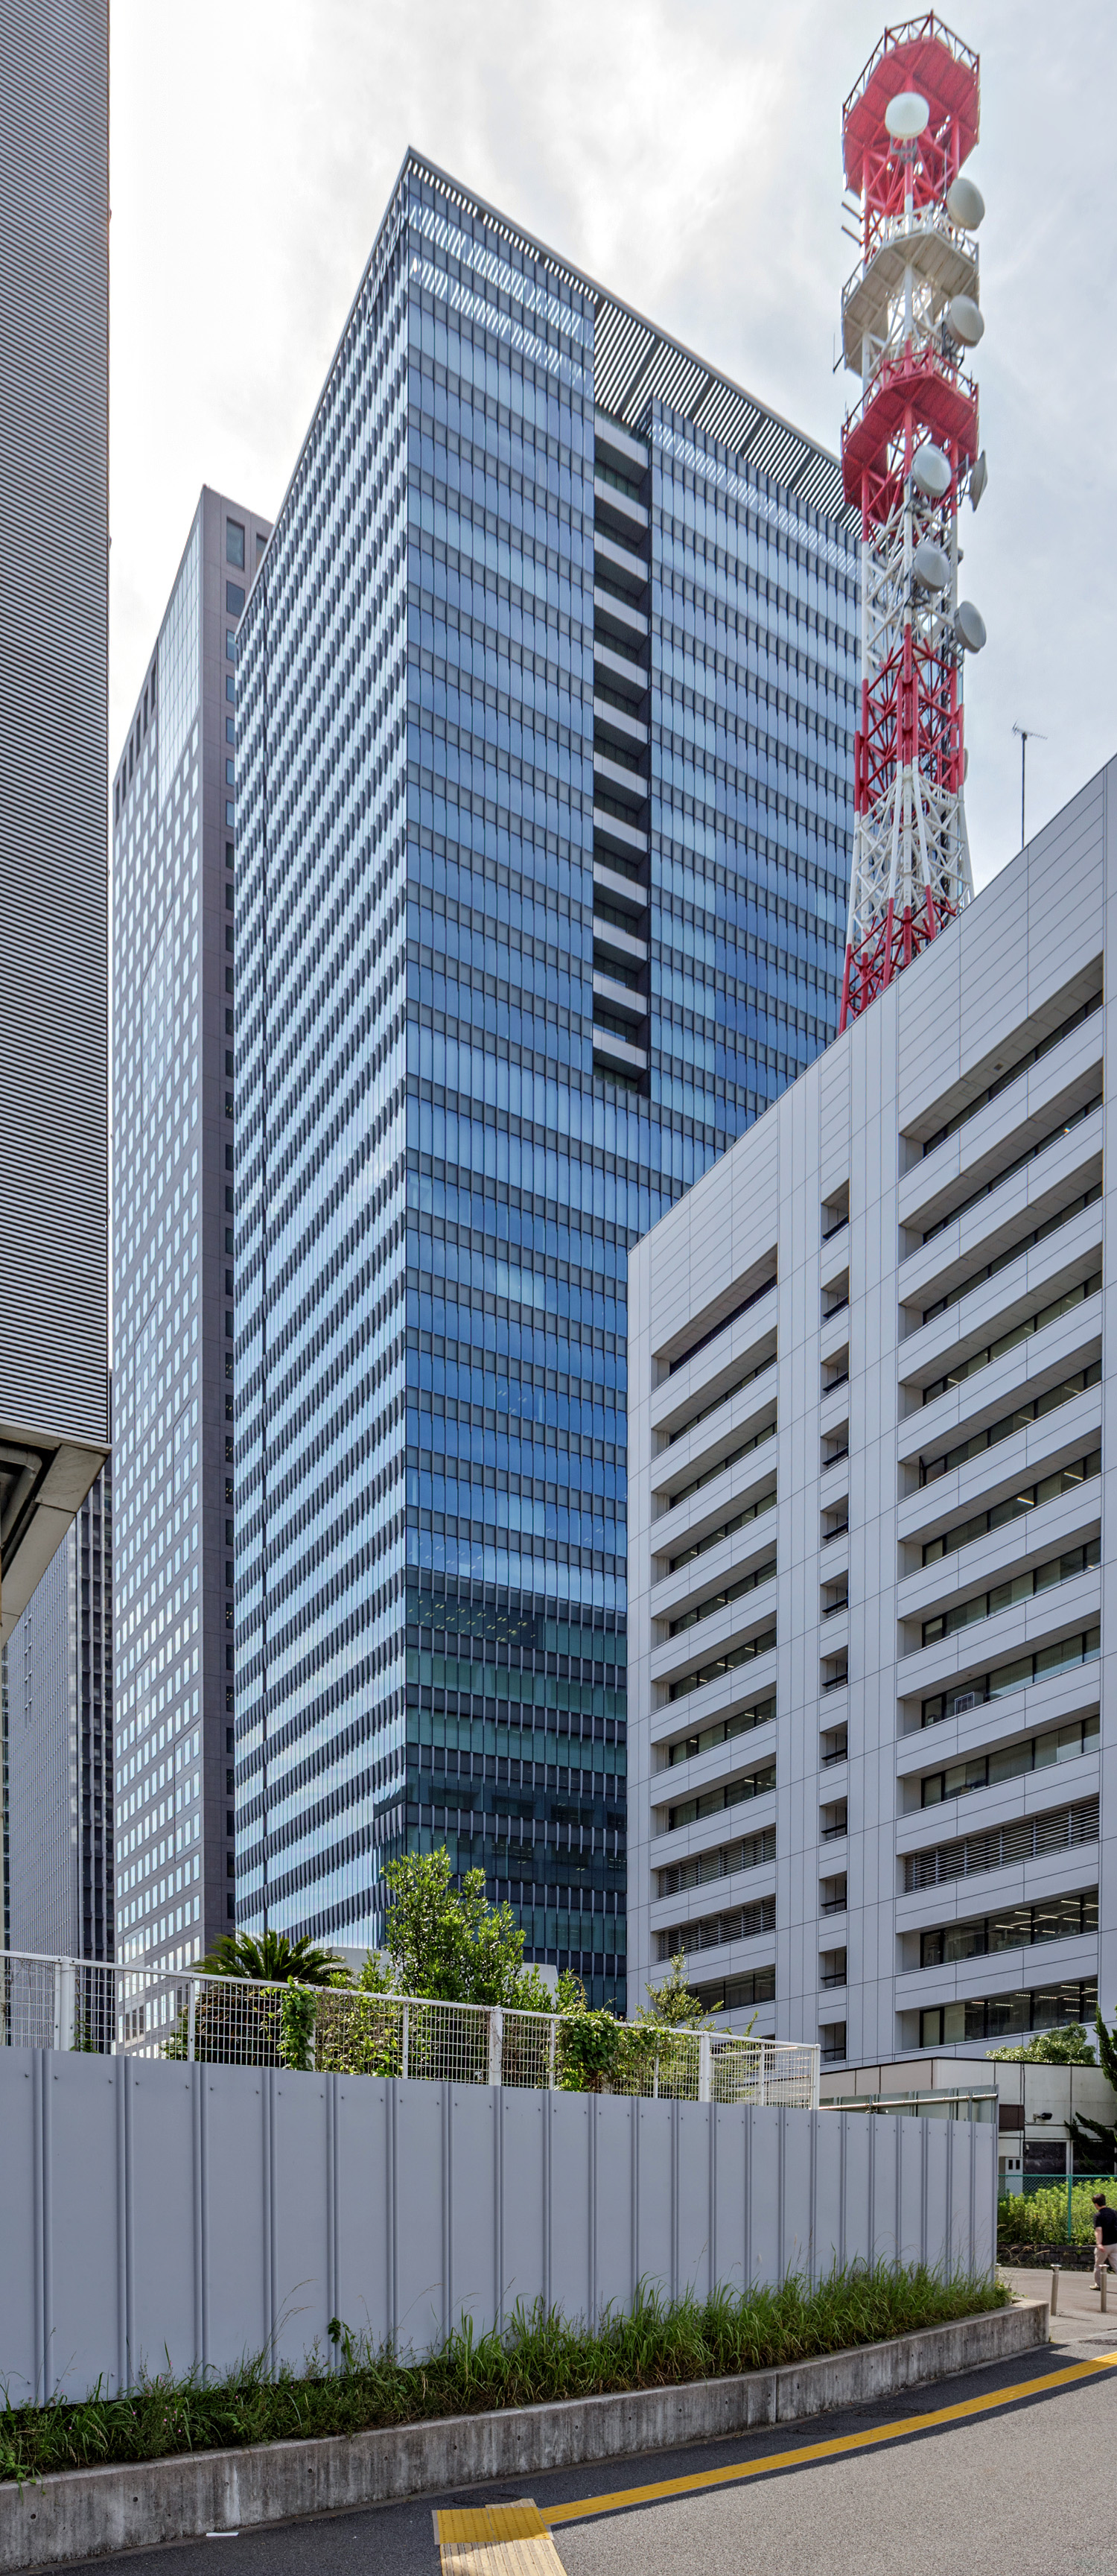 Nikkei Building, Tokyo - View from the west. © Mathias Beinling